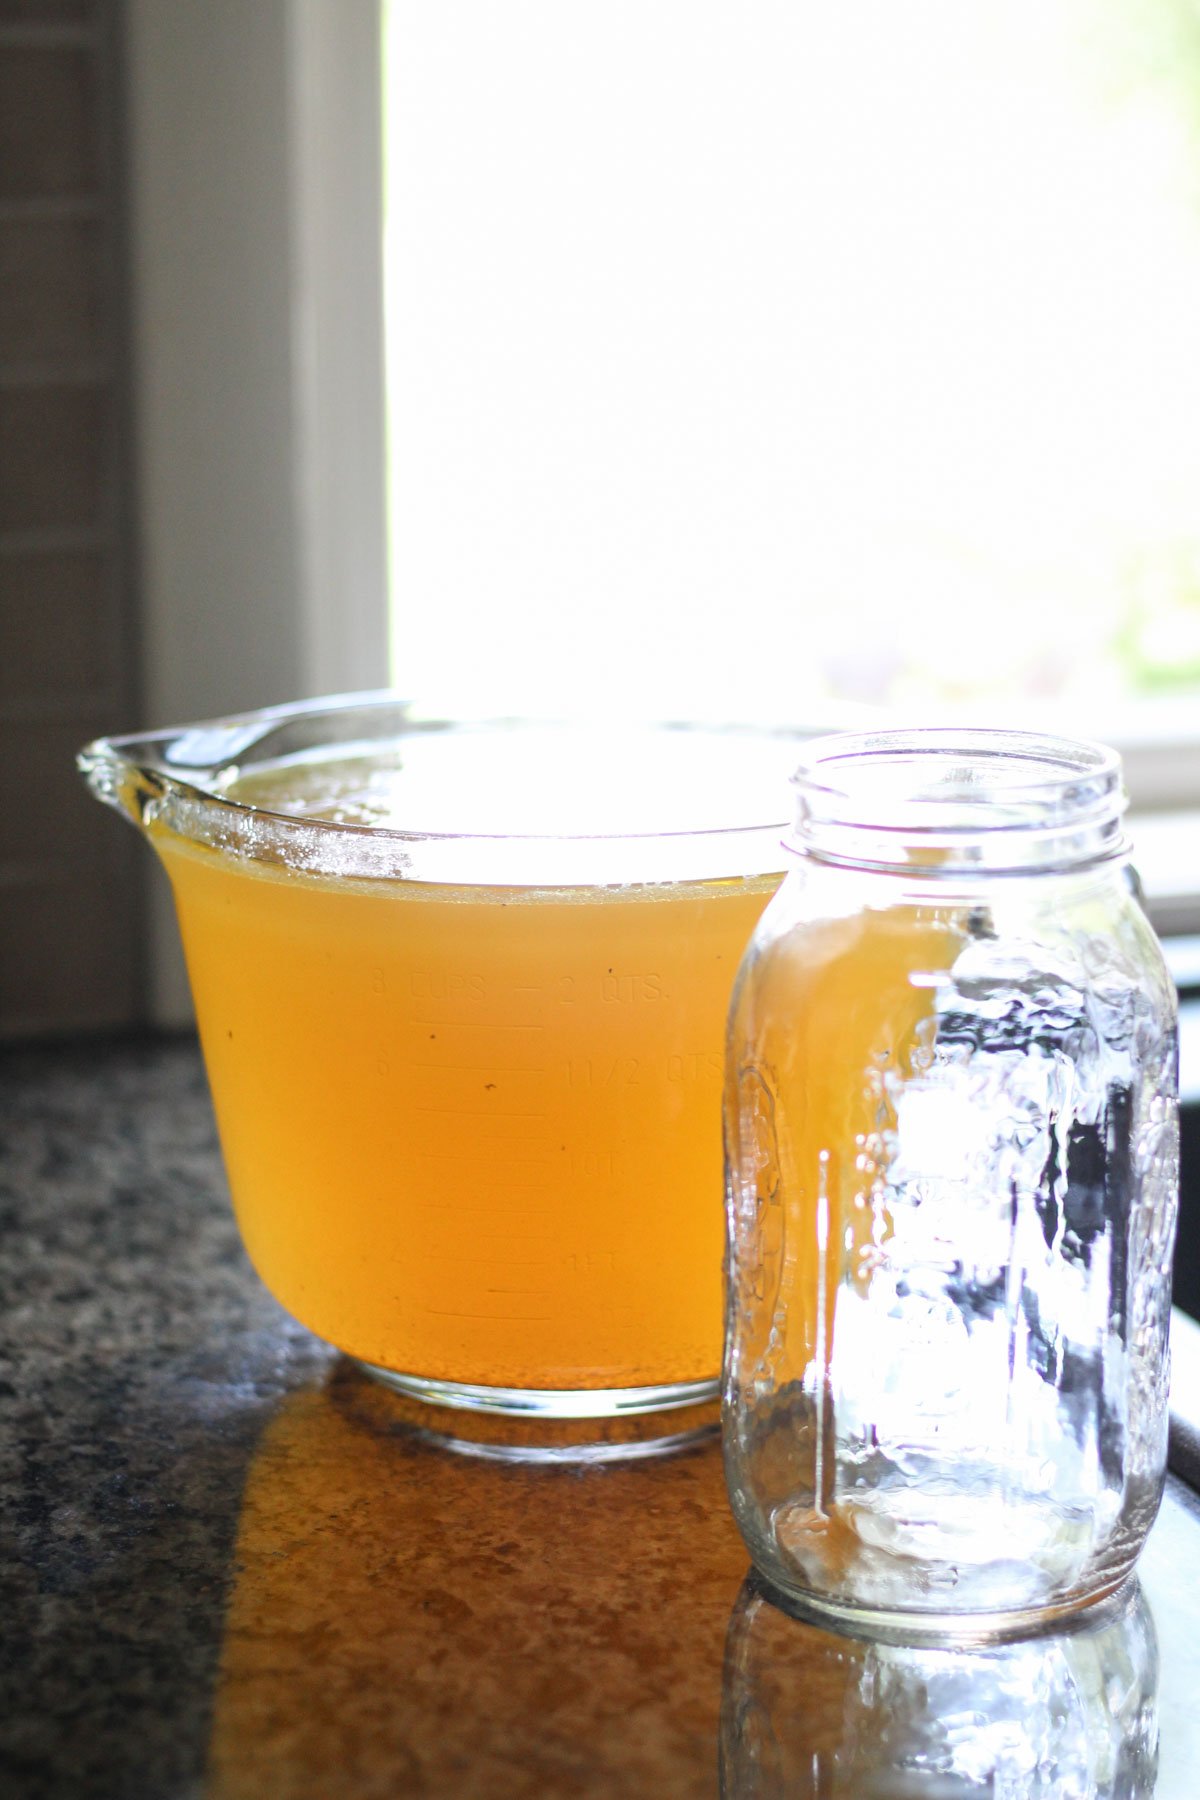 Chicken broth in a large jar